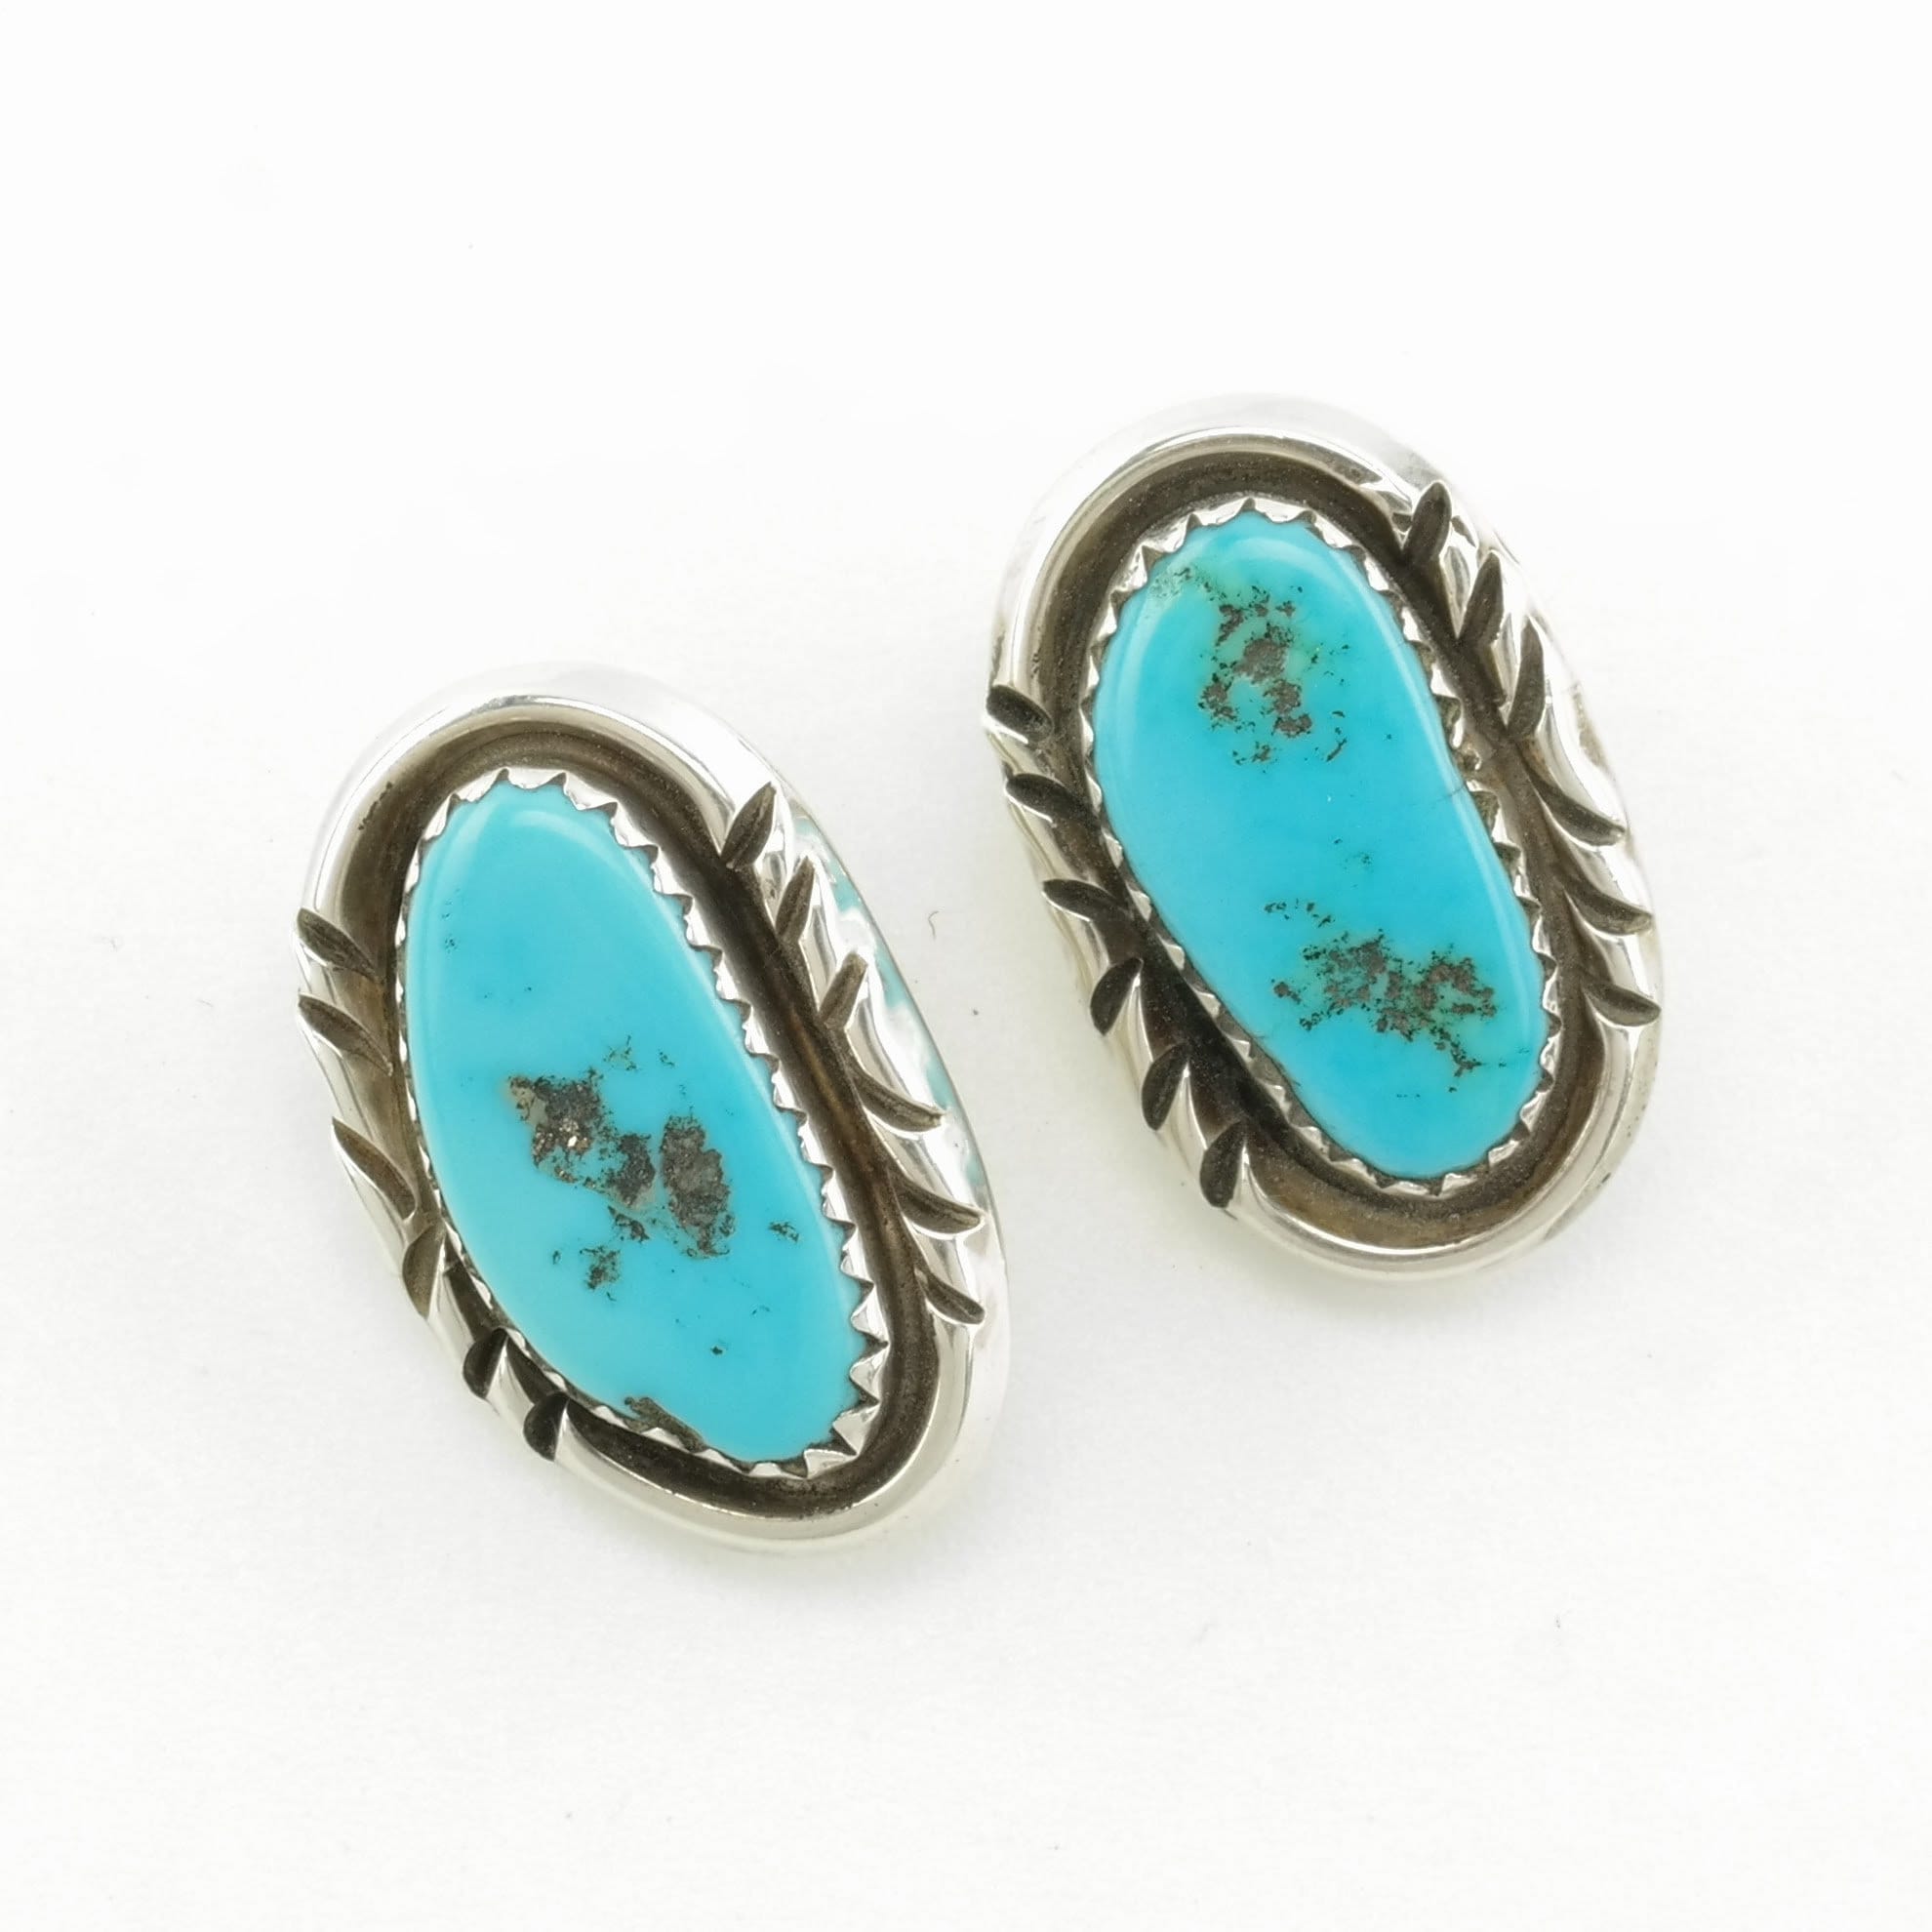 Native American Sterling Silver Turquoise Sleeping Beauty Earrings Clip on